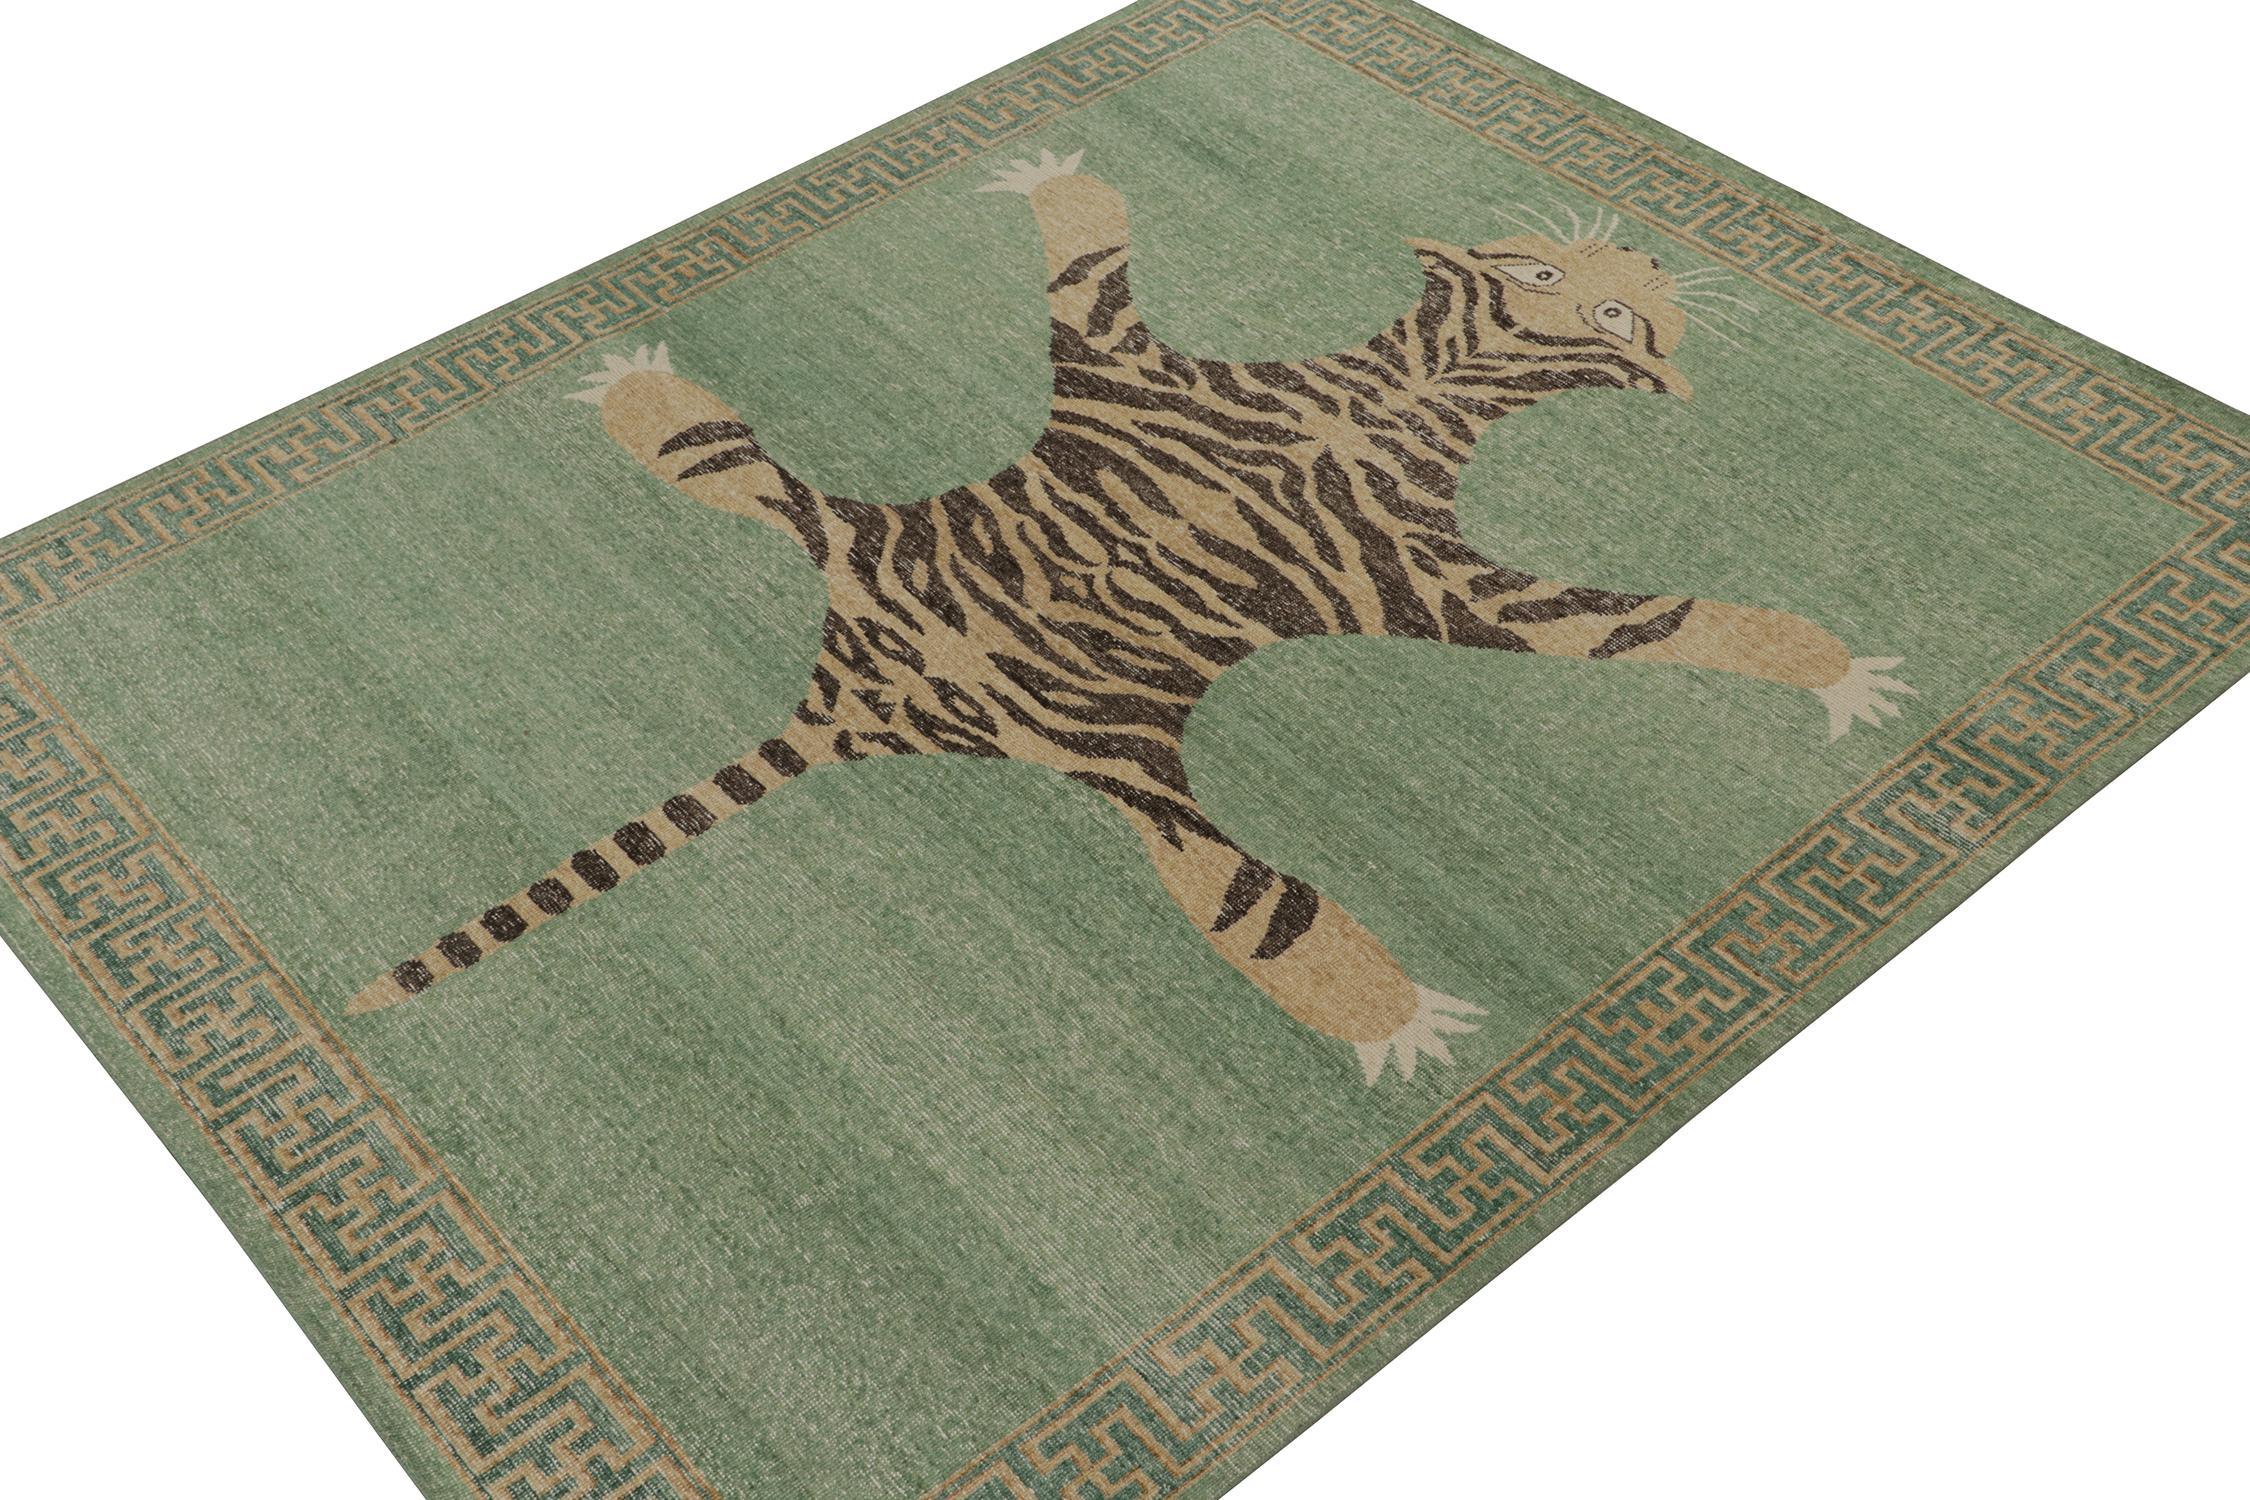 This 8x10 rug is a new addition to Rug & Kilim’s Homage Collection, that recaptures the time-honored Tiger skin rug design.

Further On the Design: 

This particular piece is inspired by antique Indian Tiger-skin rugs of the most regal, inviting